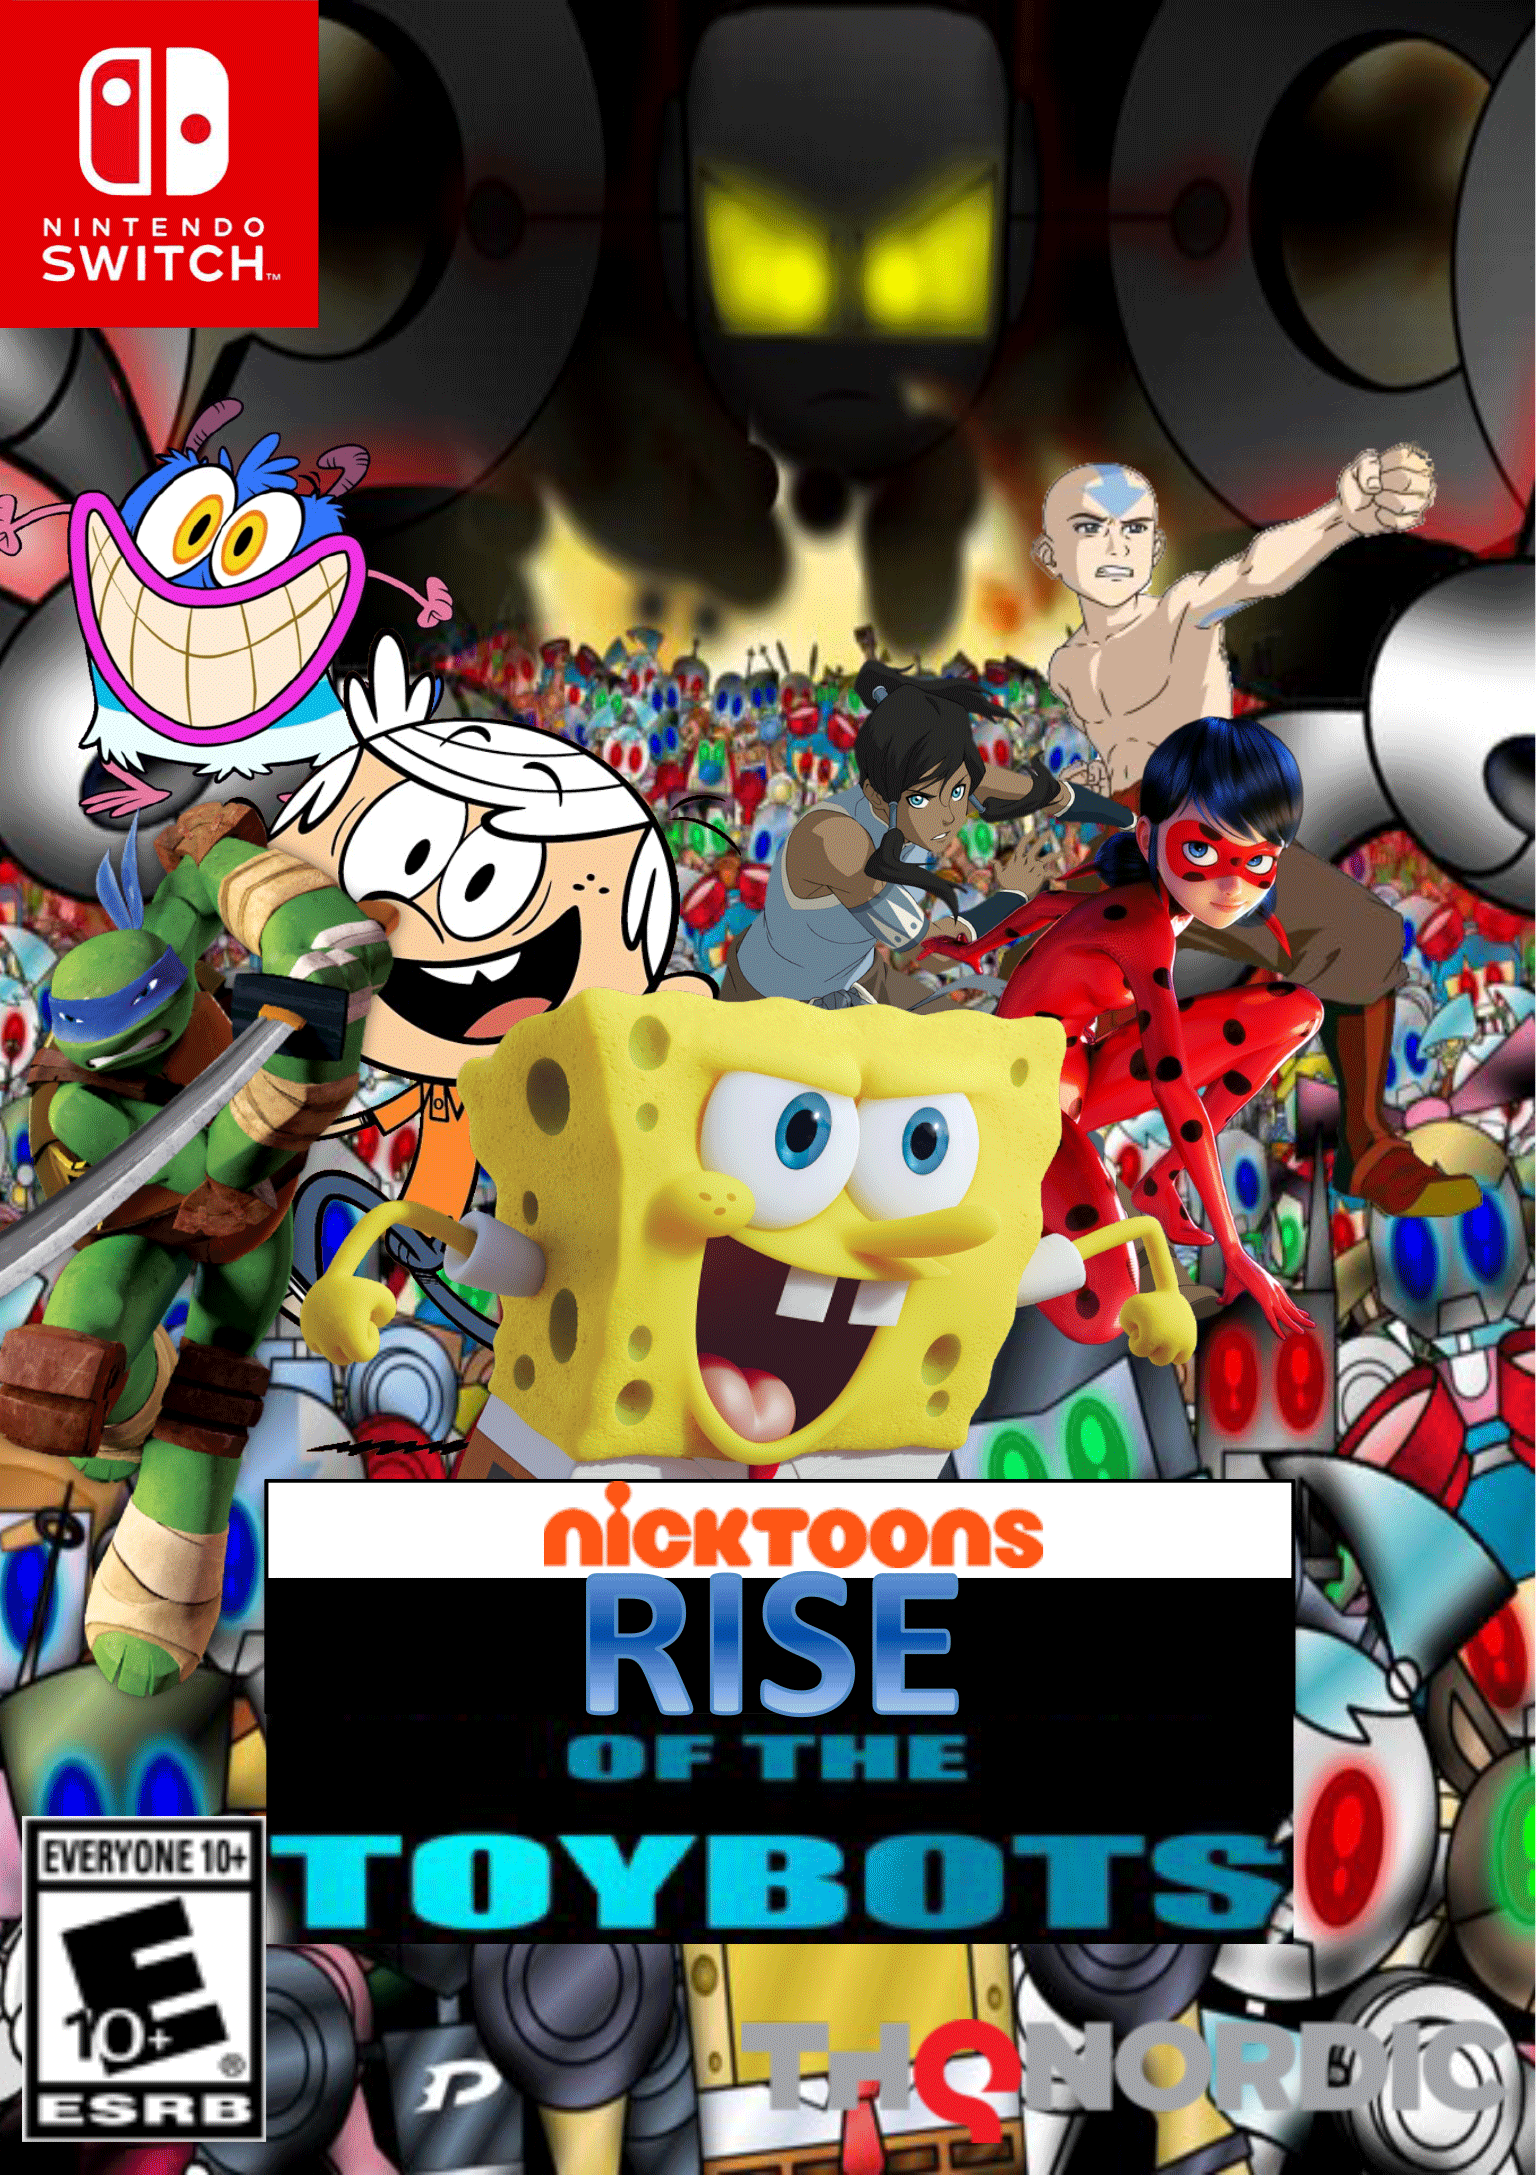 Nicktoons: Rise of the Toybots | Video Game Fanon Wiki | FANDOM powered by Wikia